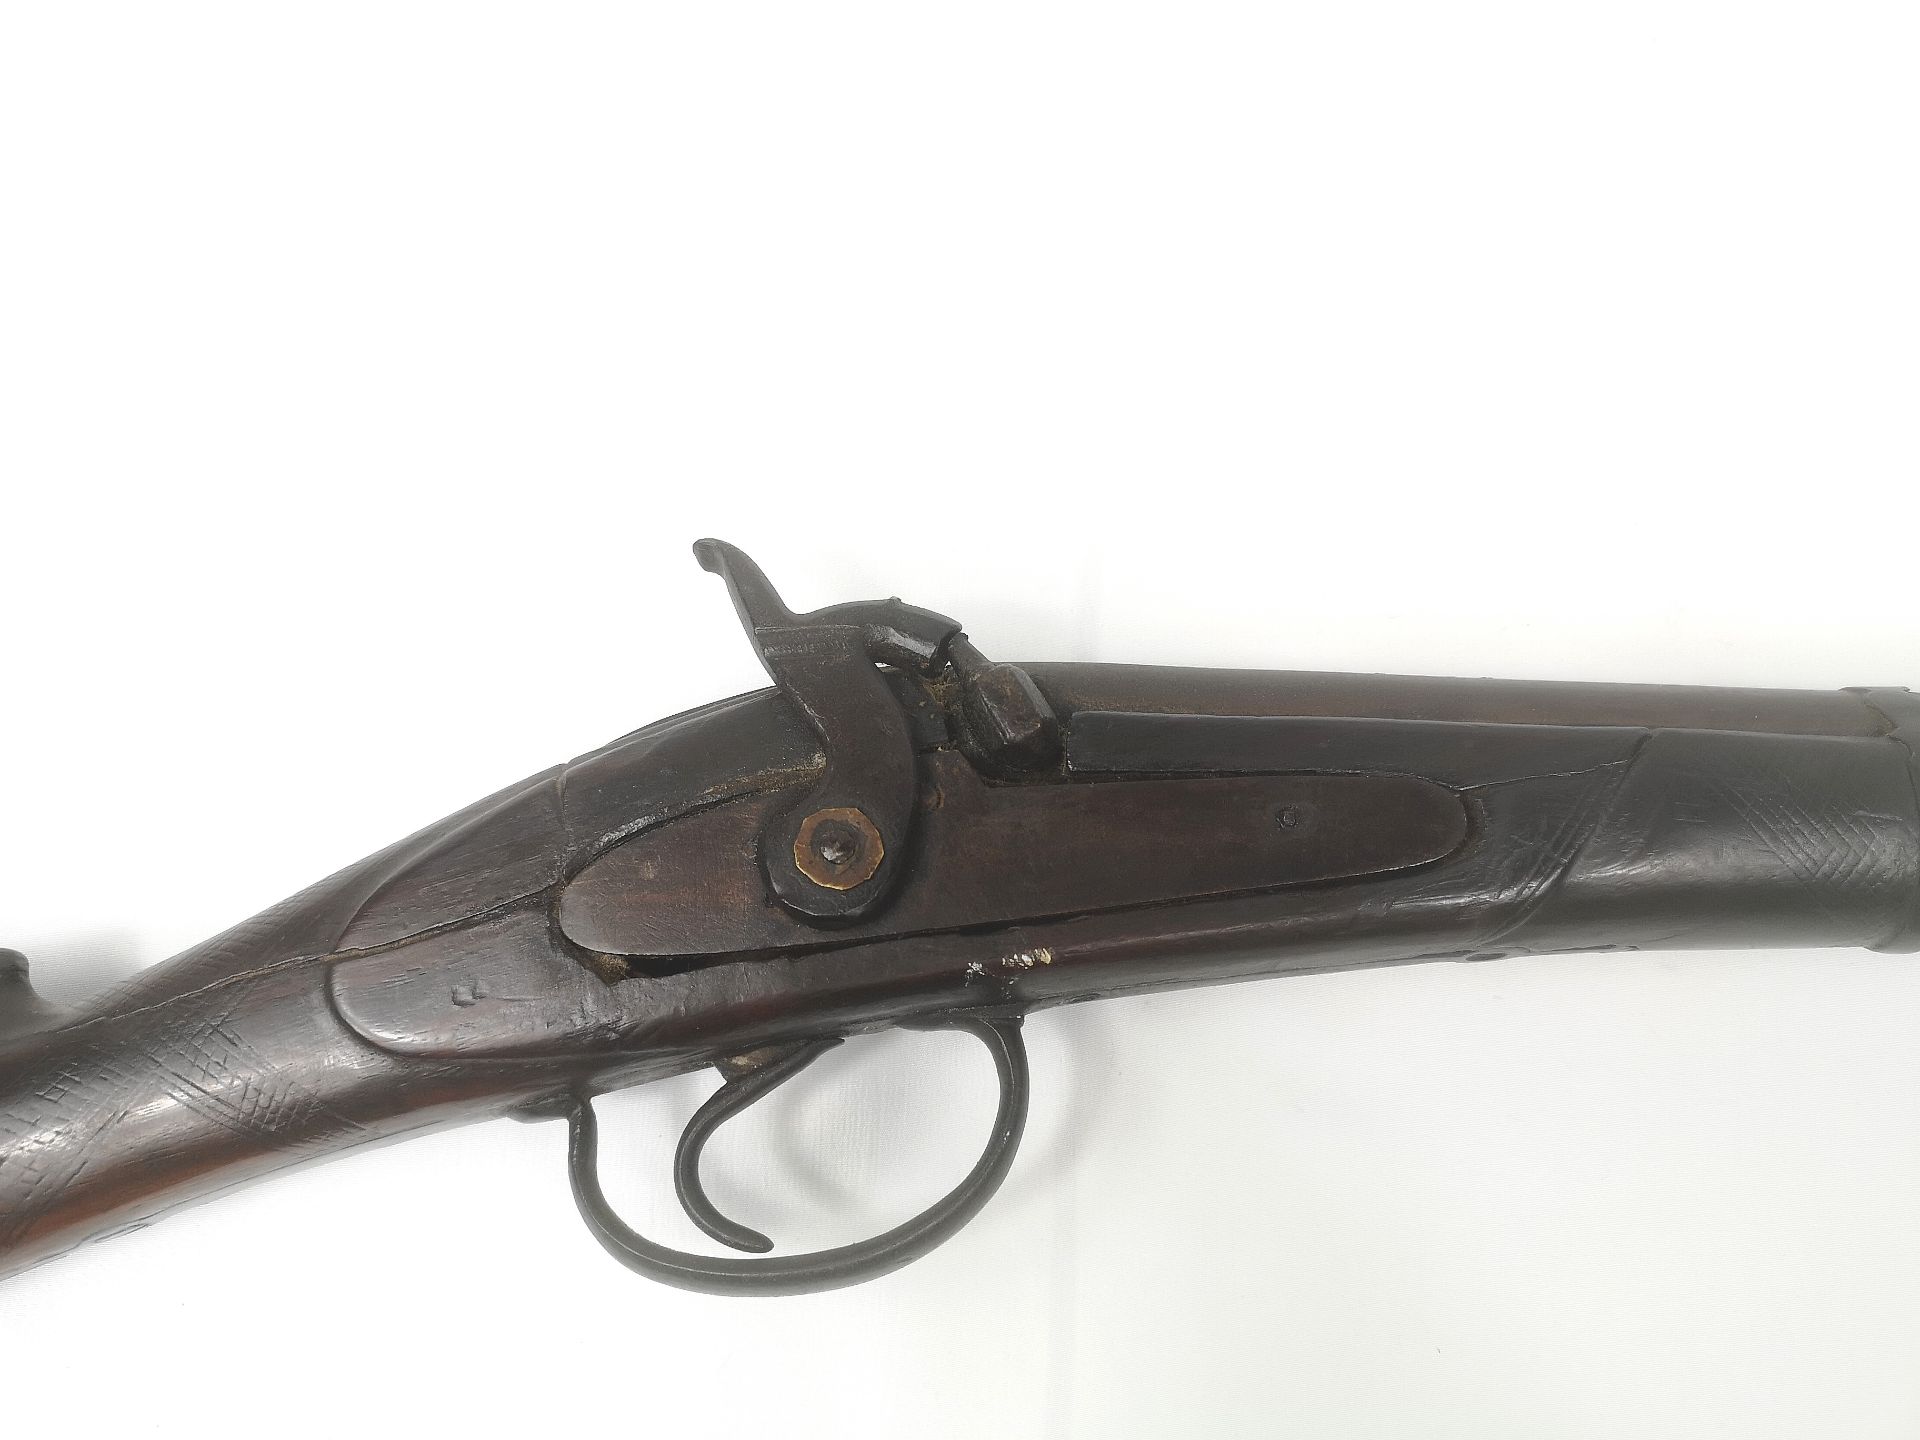 Musket with wood stock - Image 2 of 3